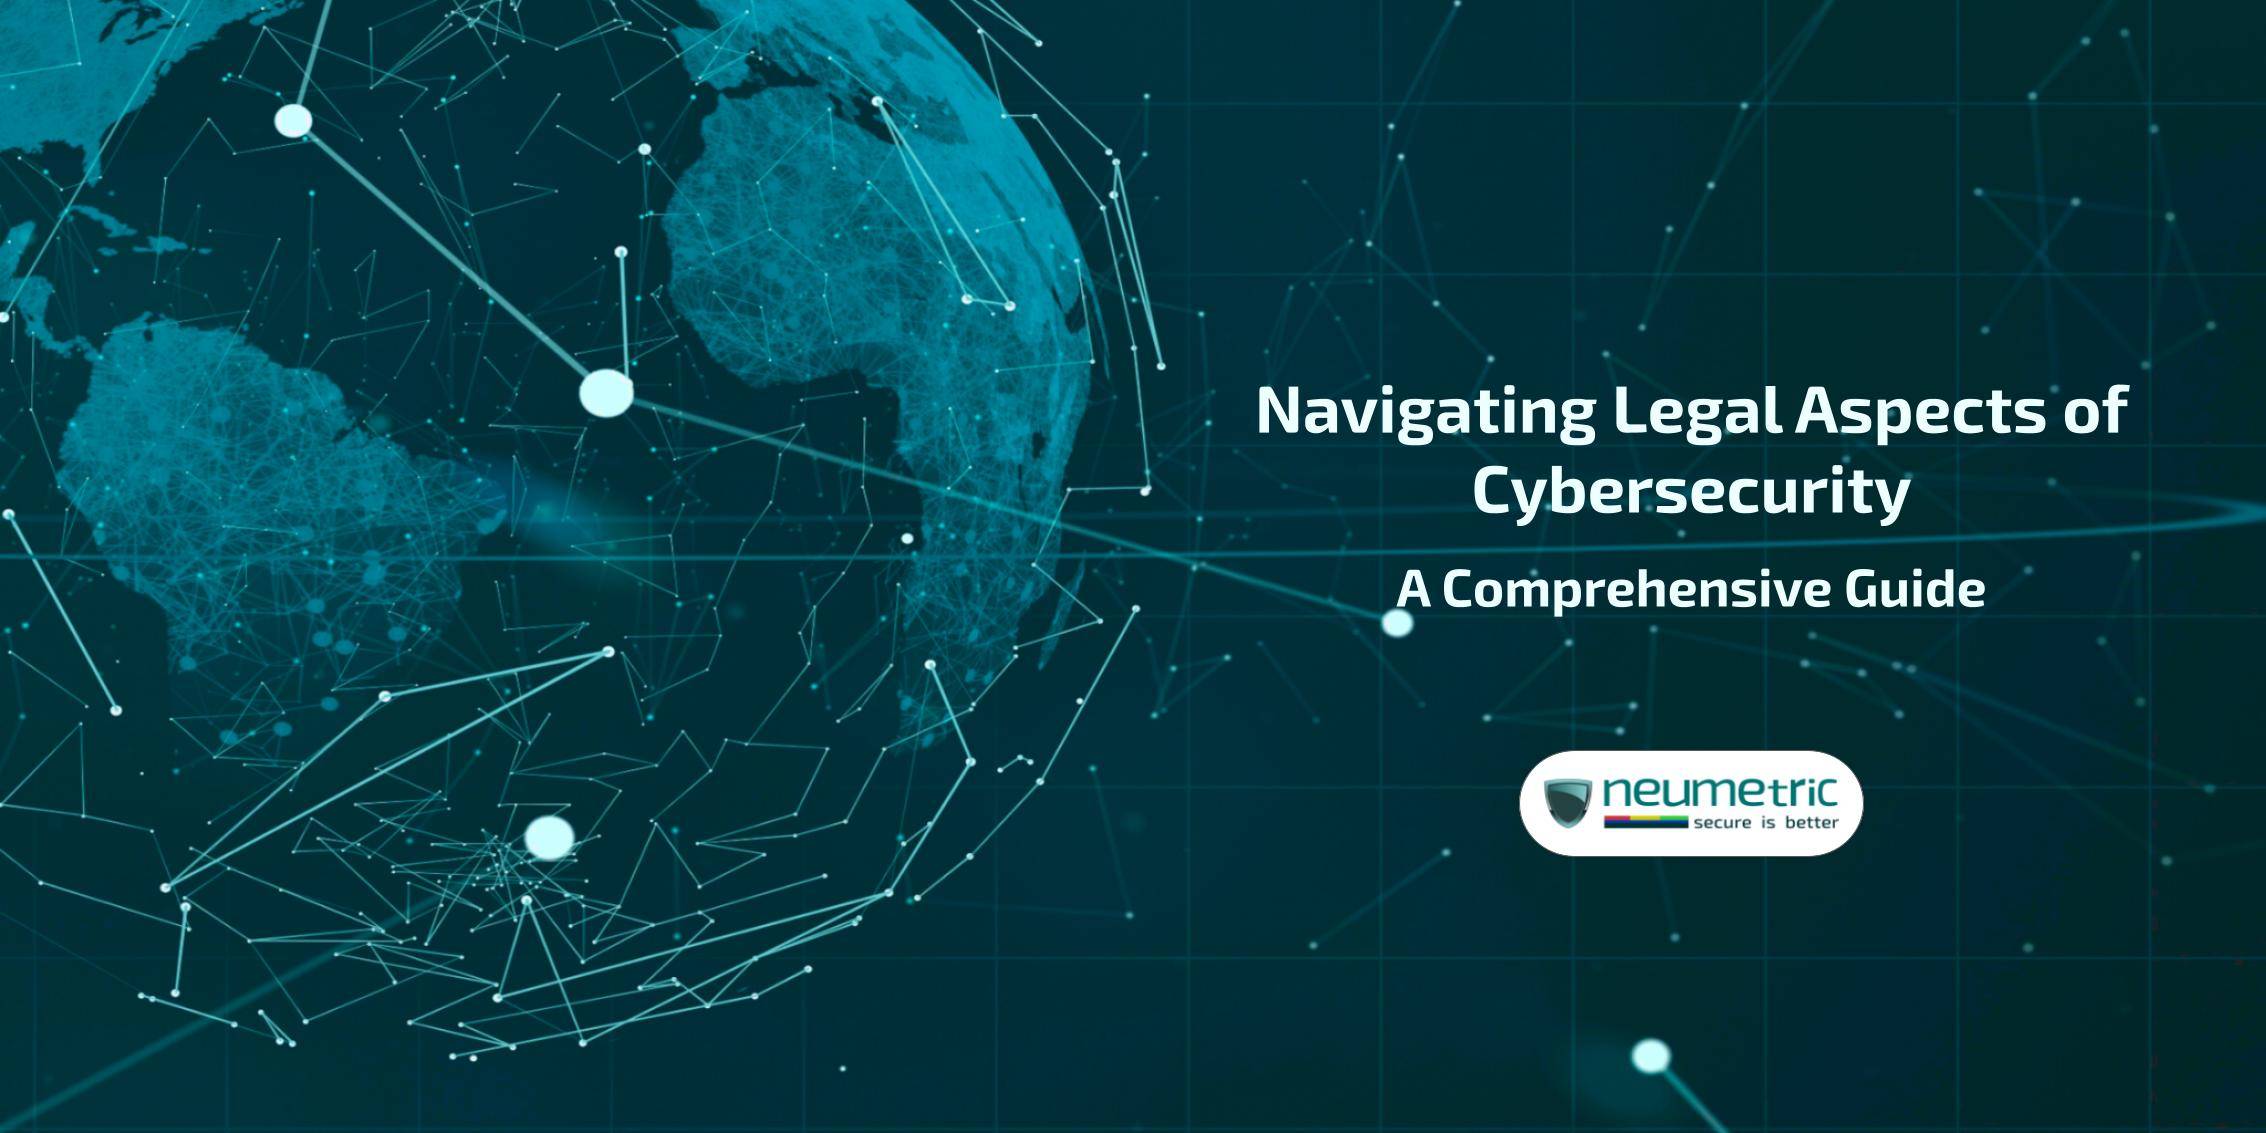 Navigating Legal Aspects of Cybersecurity: A Comprehensive Guide